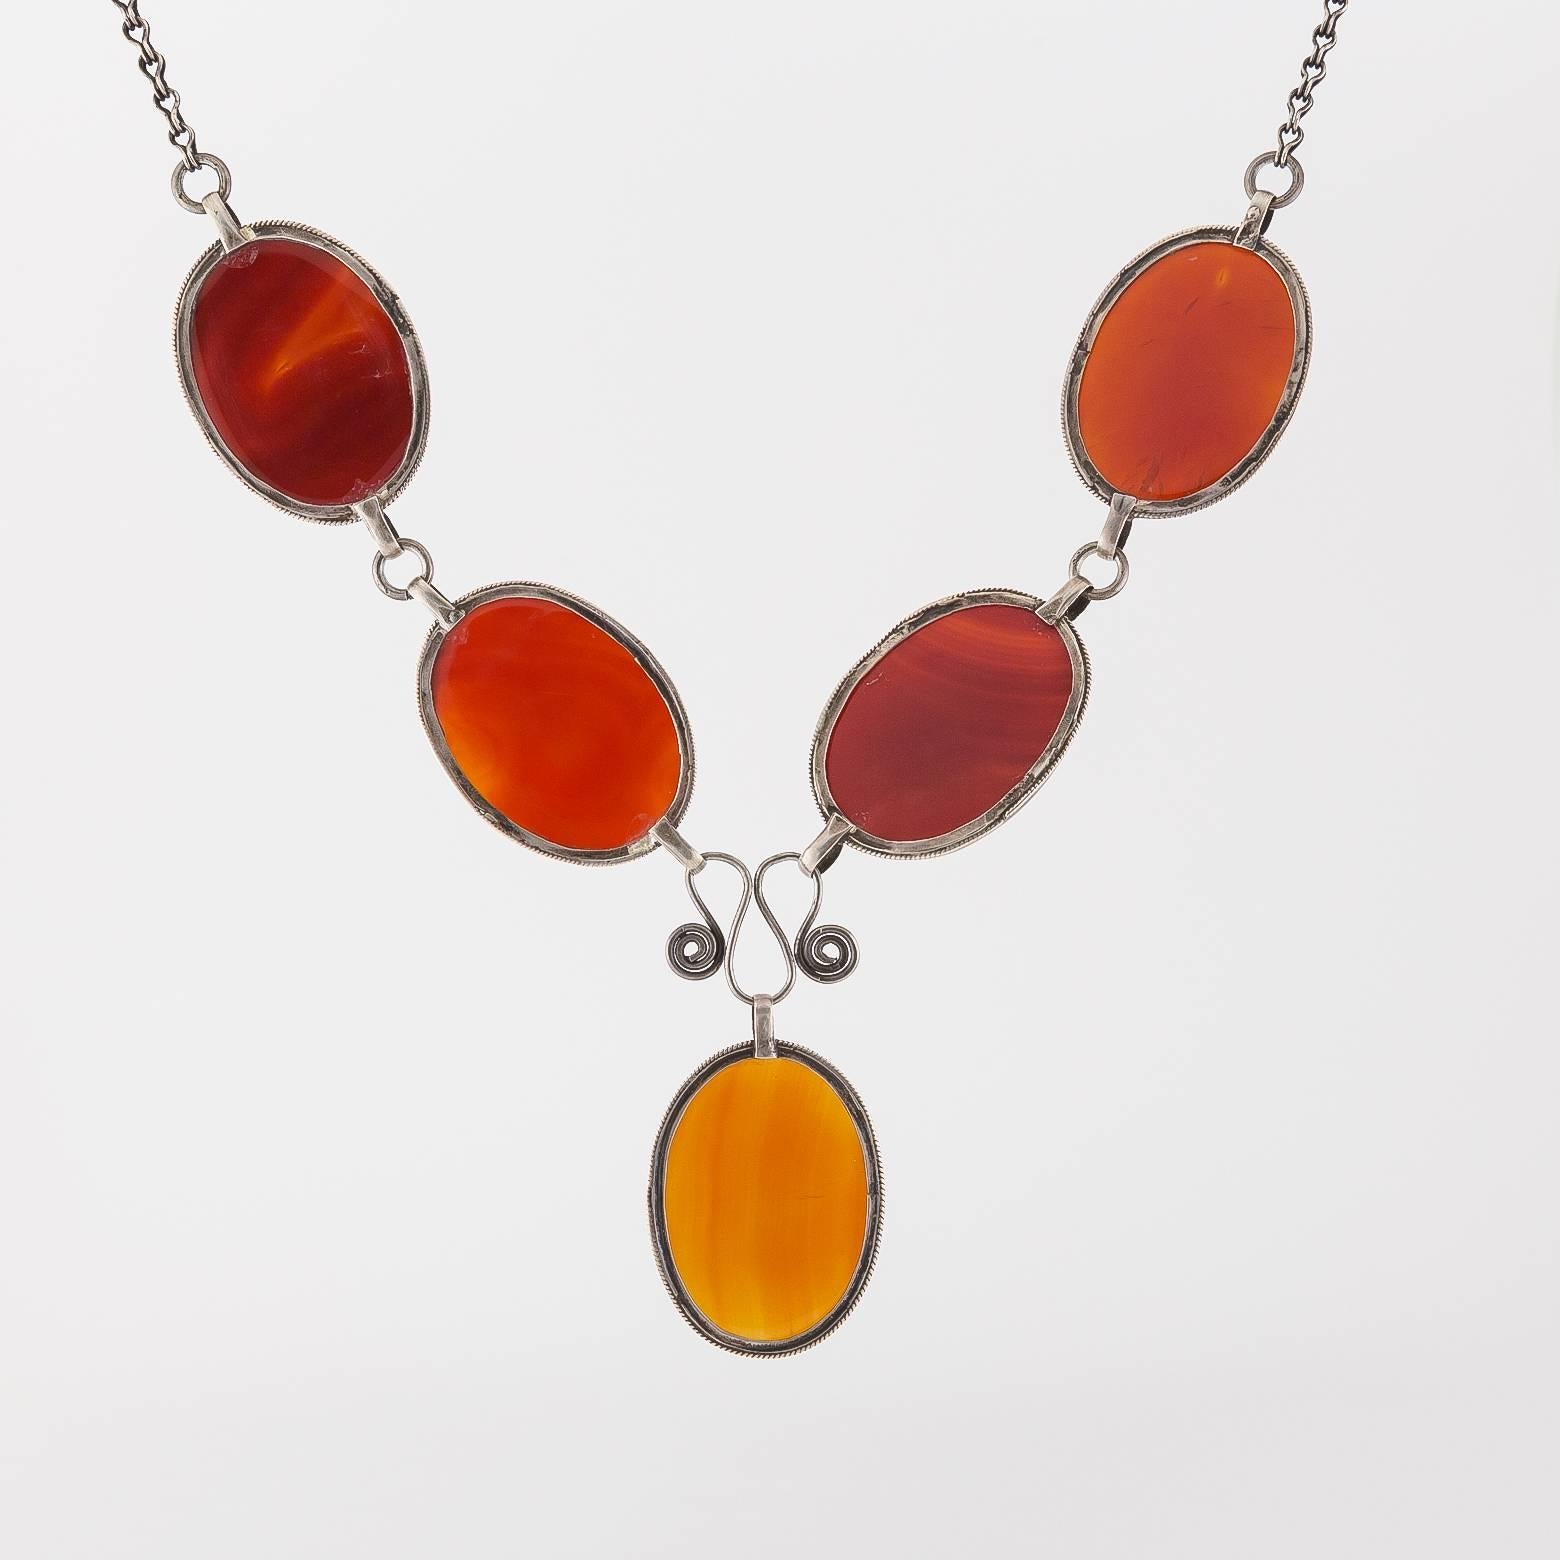 This unique statement piece is made of 5 large and gorgeous carnelian pieces that range in different colors and gradients from dark brick to red-orange. They provide a brilliant entertaining glow that fascinates the wearer with a substantial weight